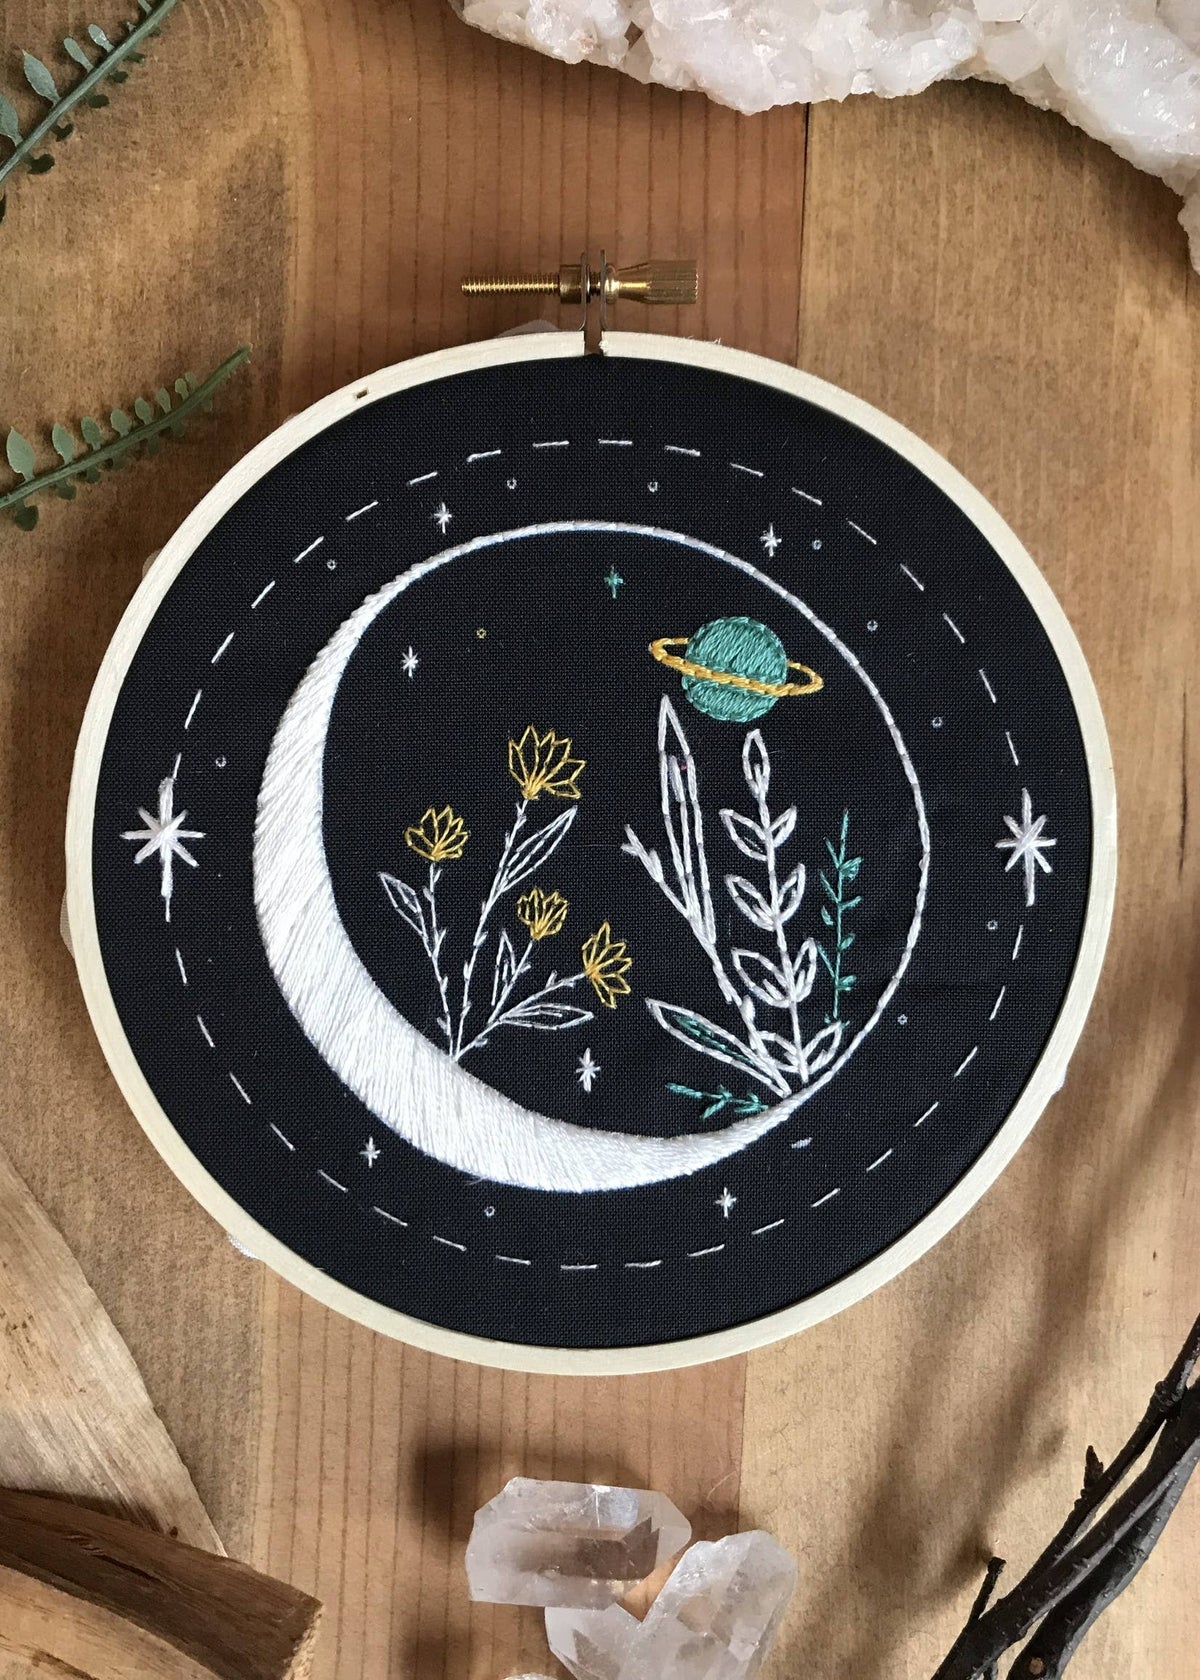 Tangled Up In Hue DIY Stitch Kit - Celestial Garden - Embroidery Kit